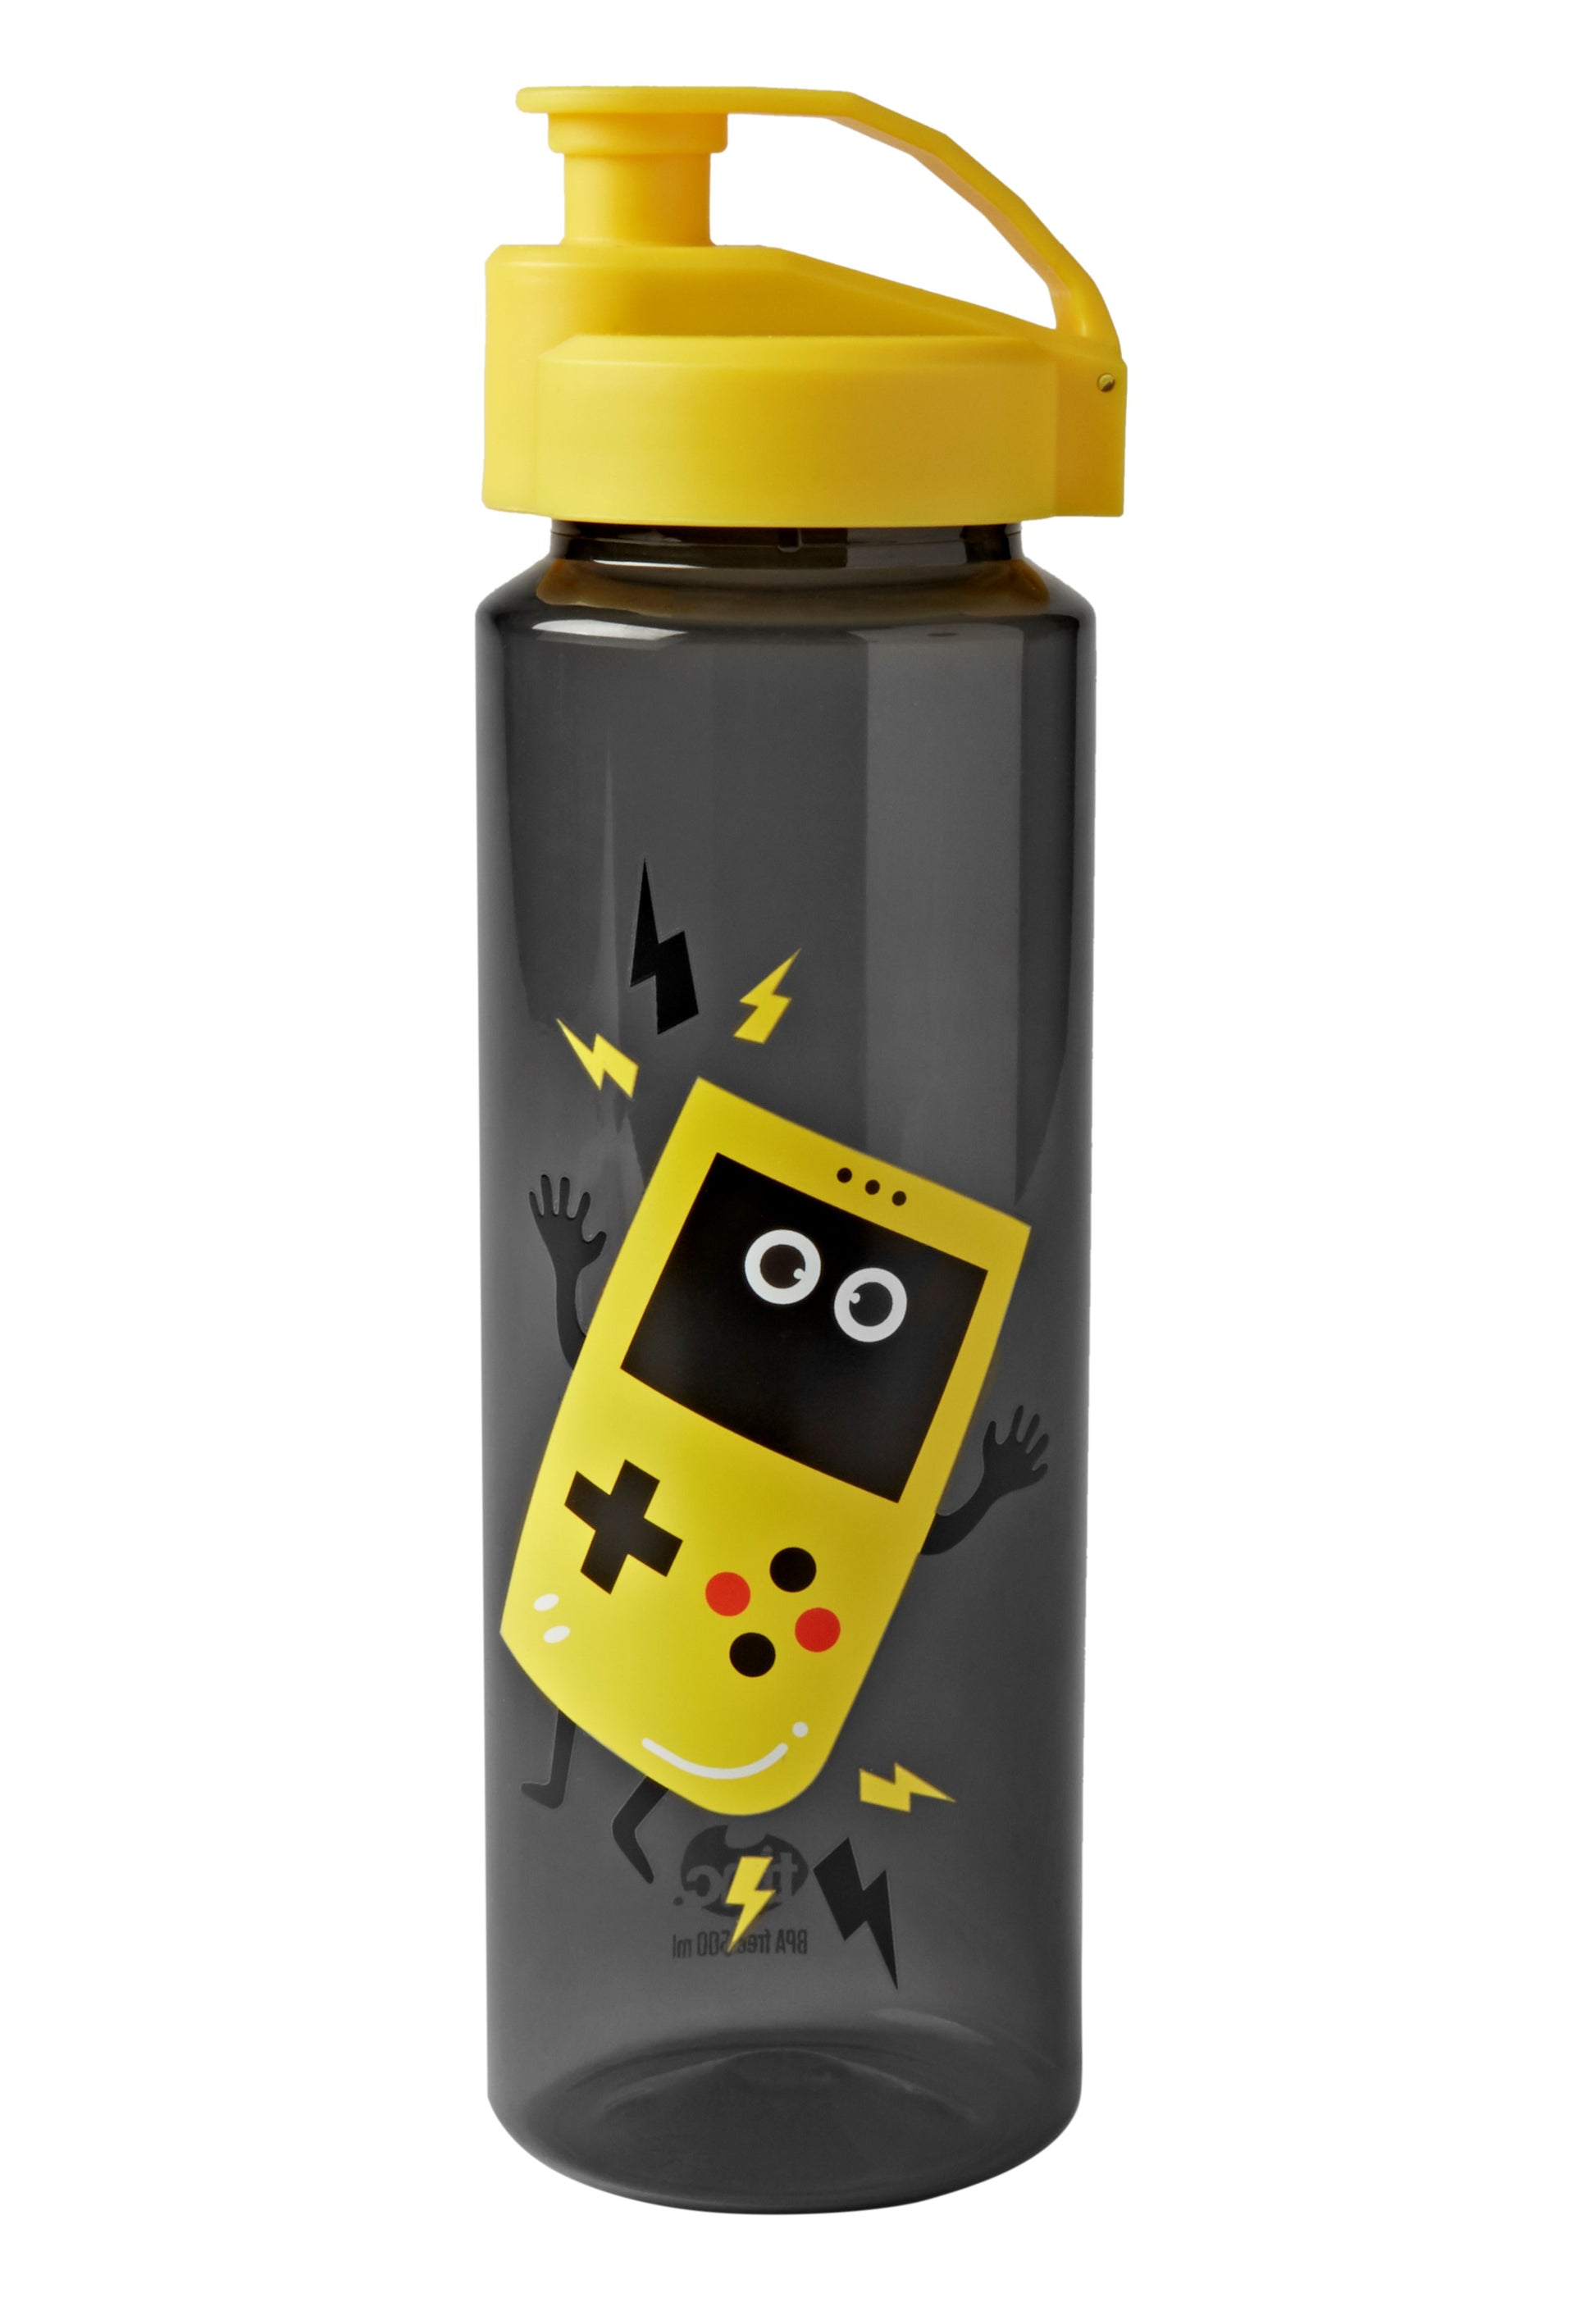 Tinc gaming design water bottle in yellow and black